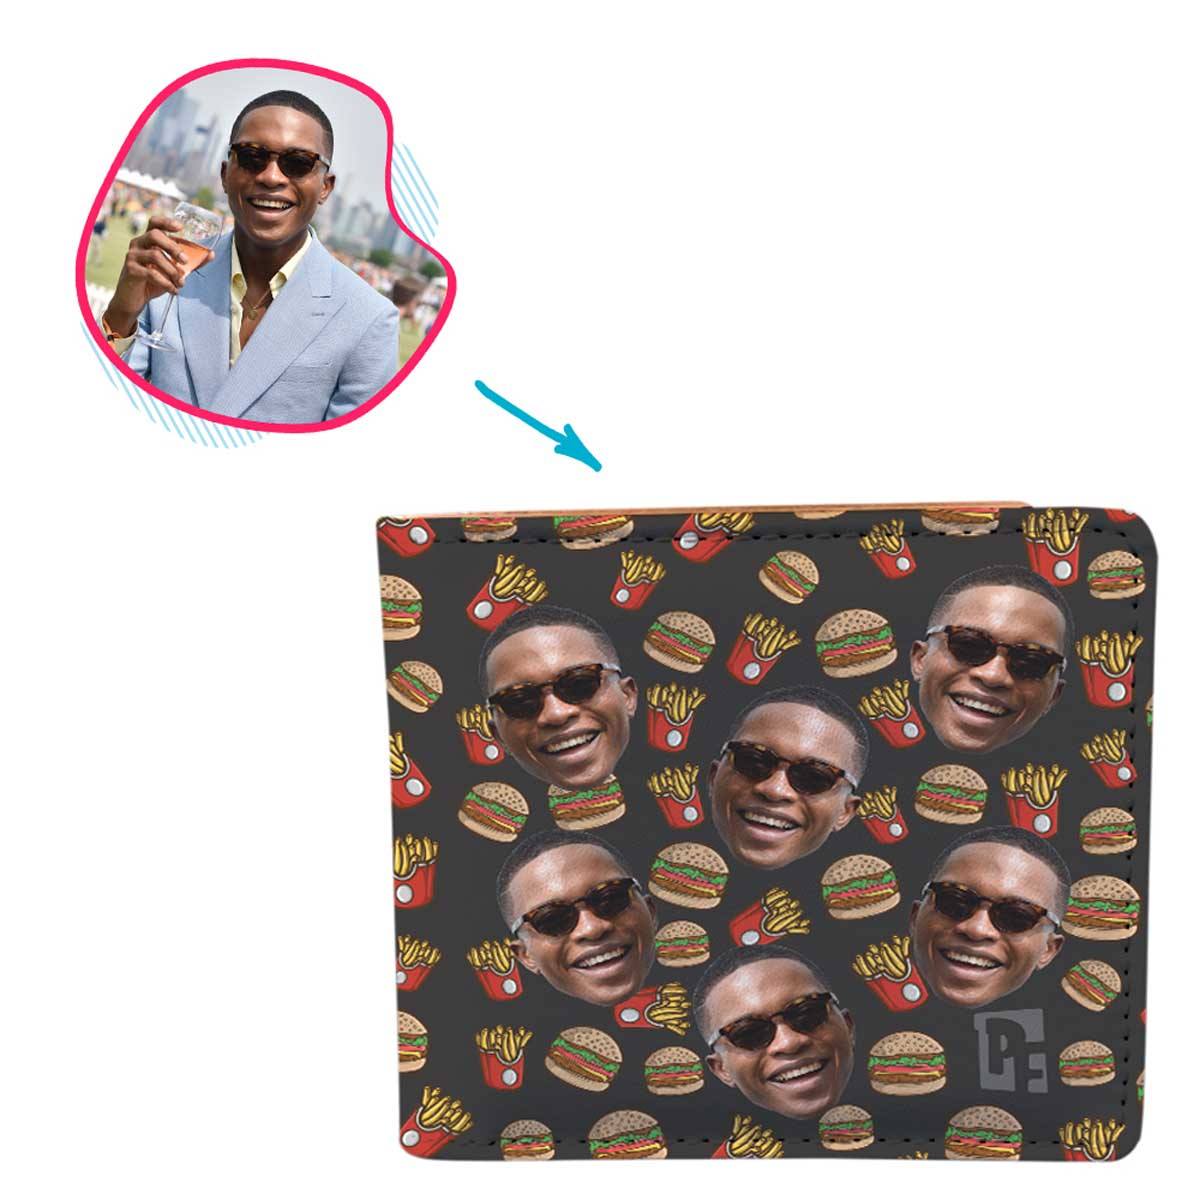 dark Fastfood wallet personalized with photo of face printed on it